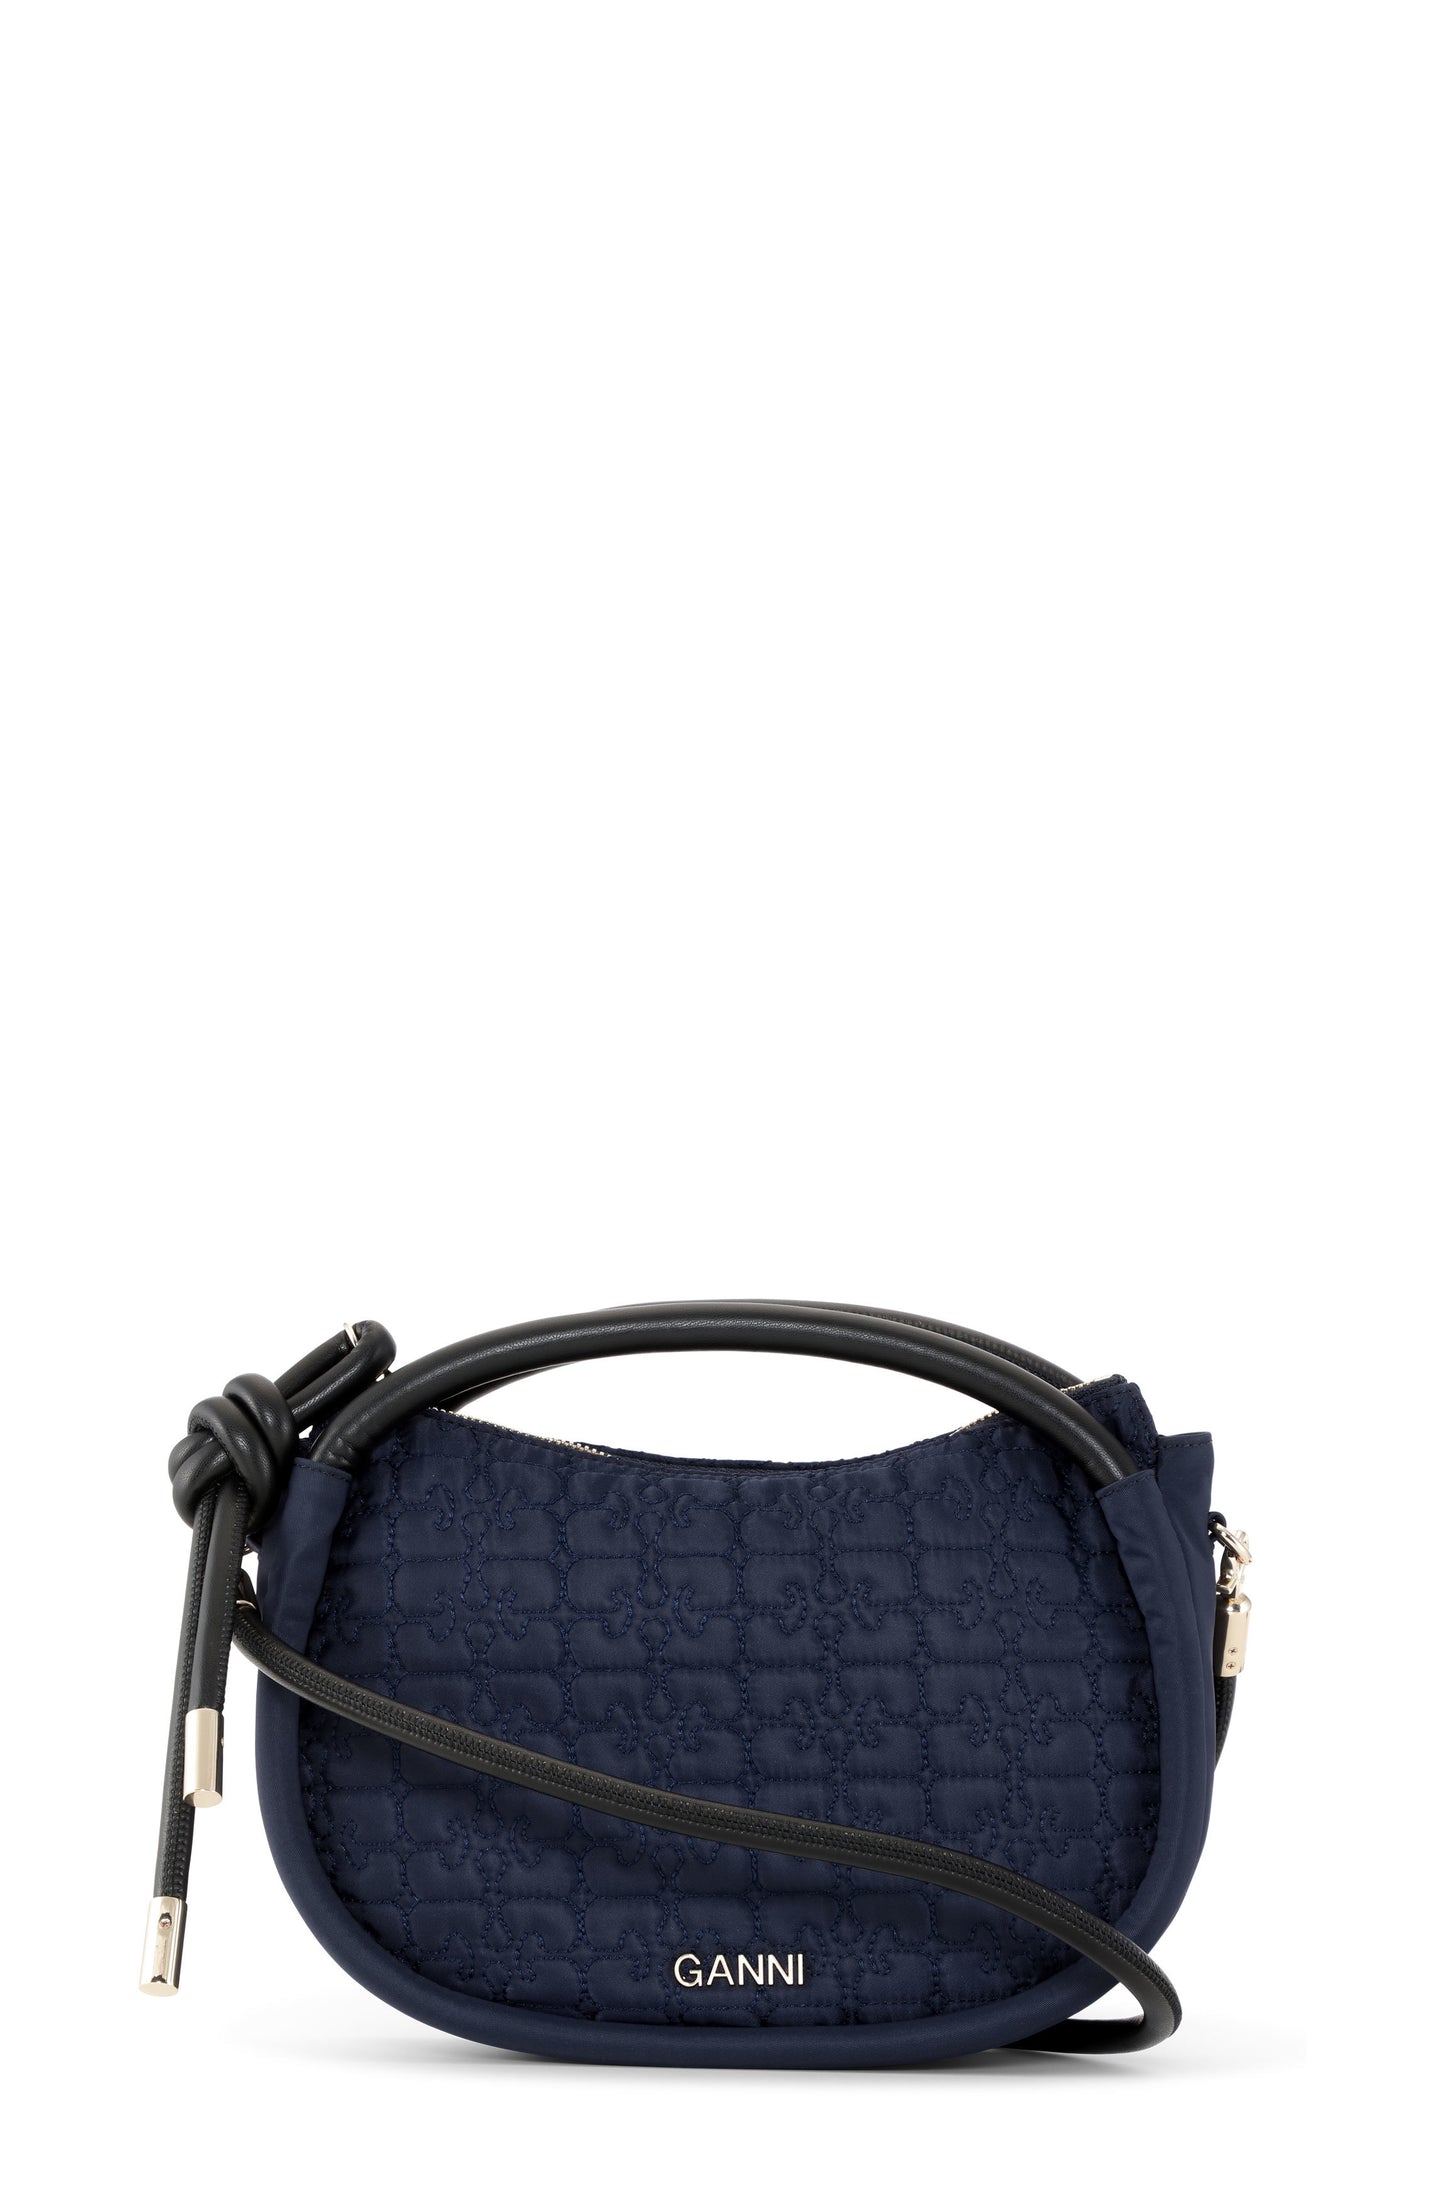 Ganni Knot Quilted Mini Bag in Sky Captain